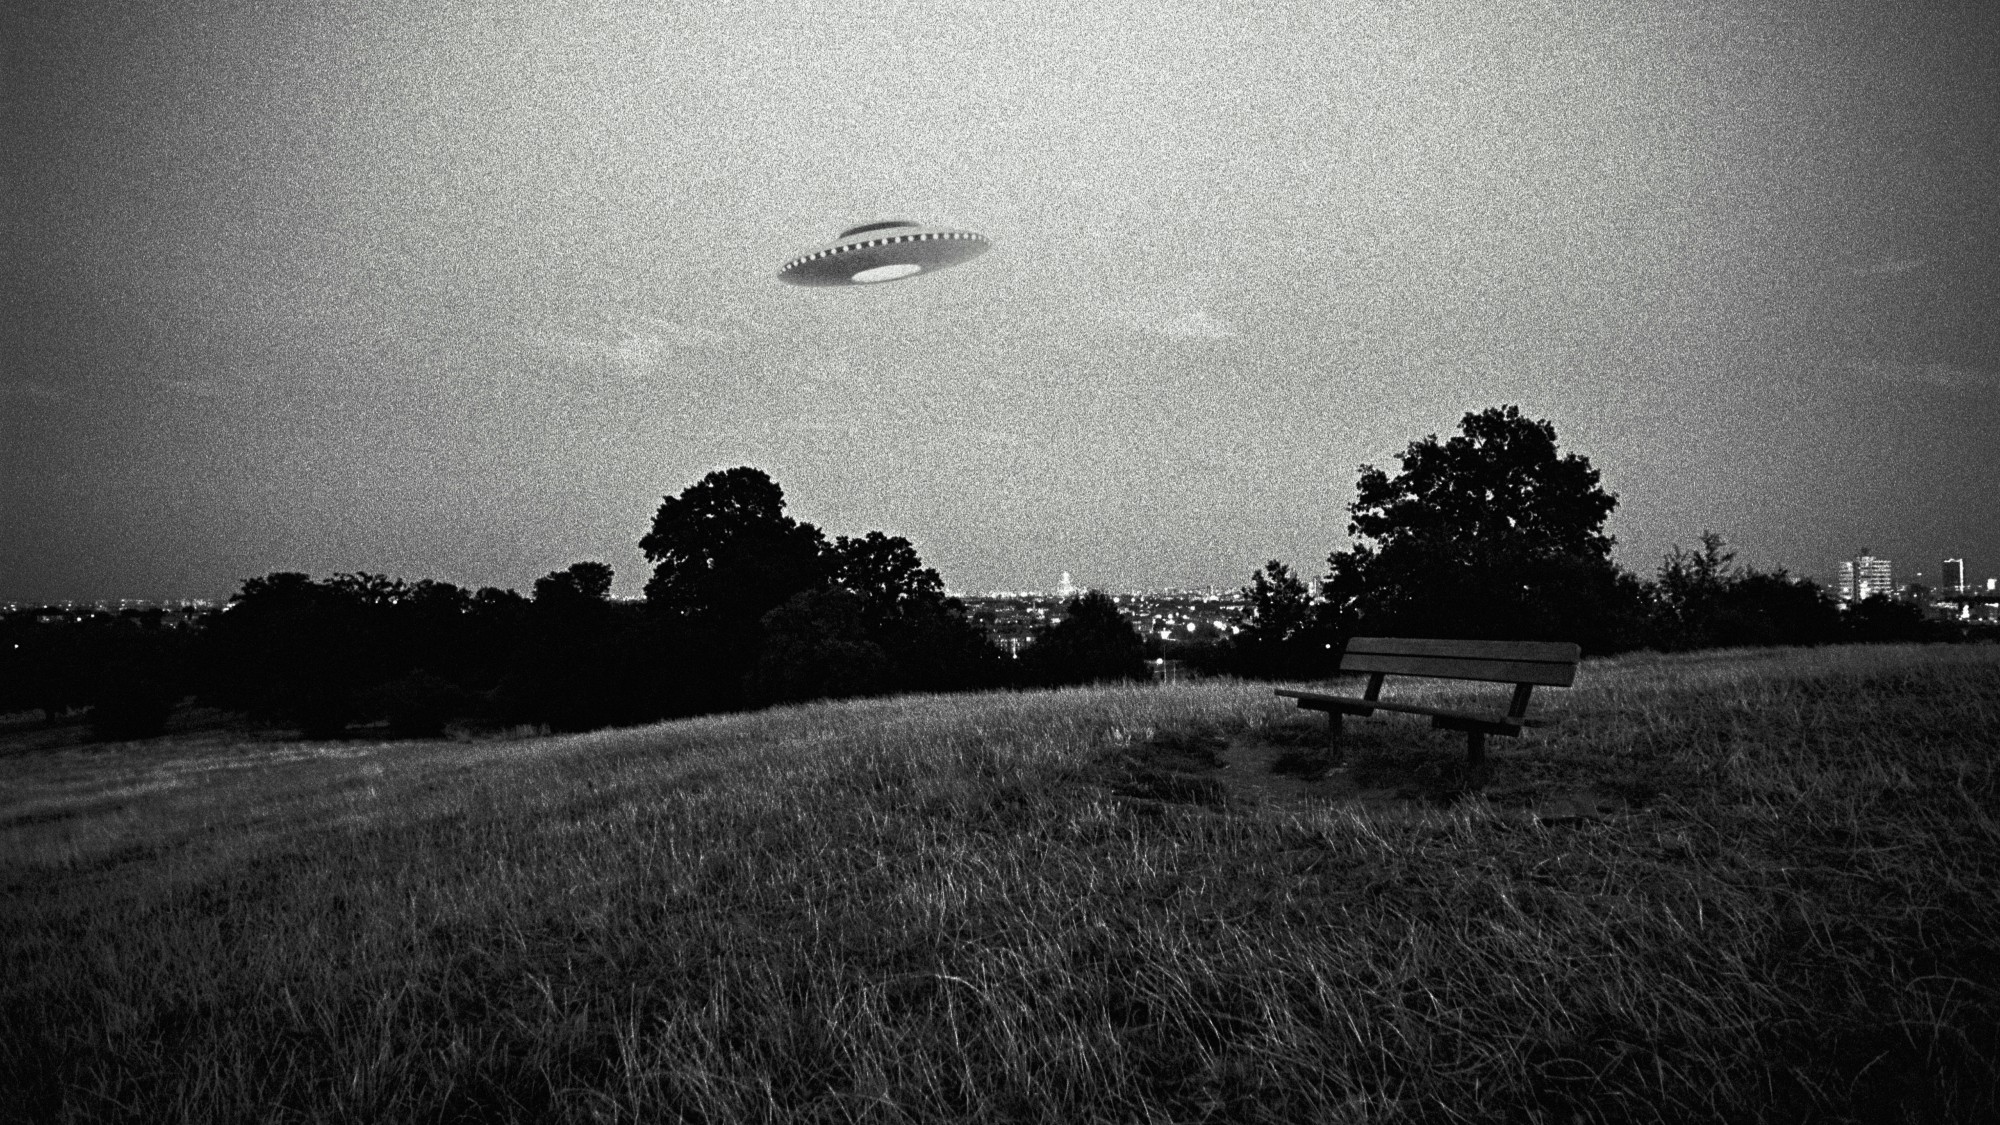 The Real-Life UFO Story That Led to a Famously Unmade Steven Spielberg Sci-fi Movie